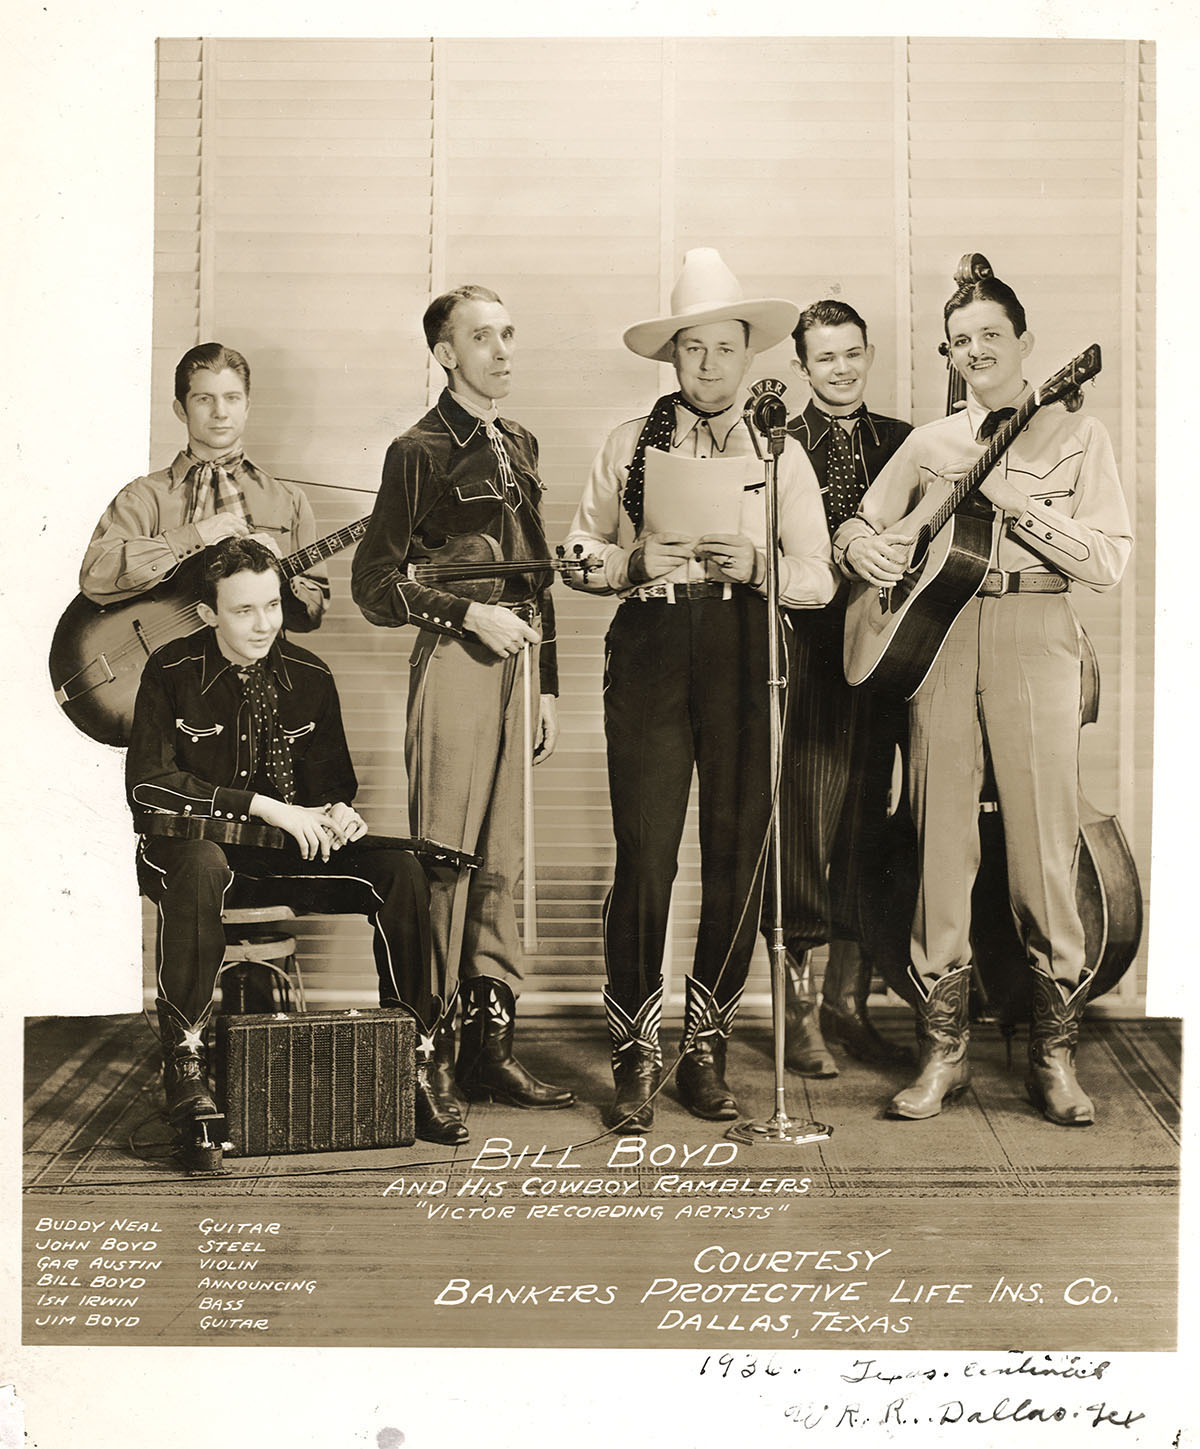 A group of men in hats holding guitars and standing at microphones